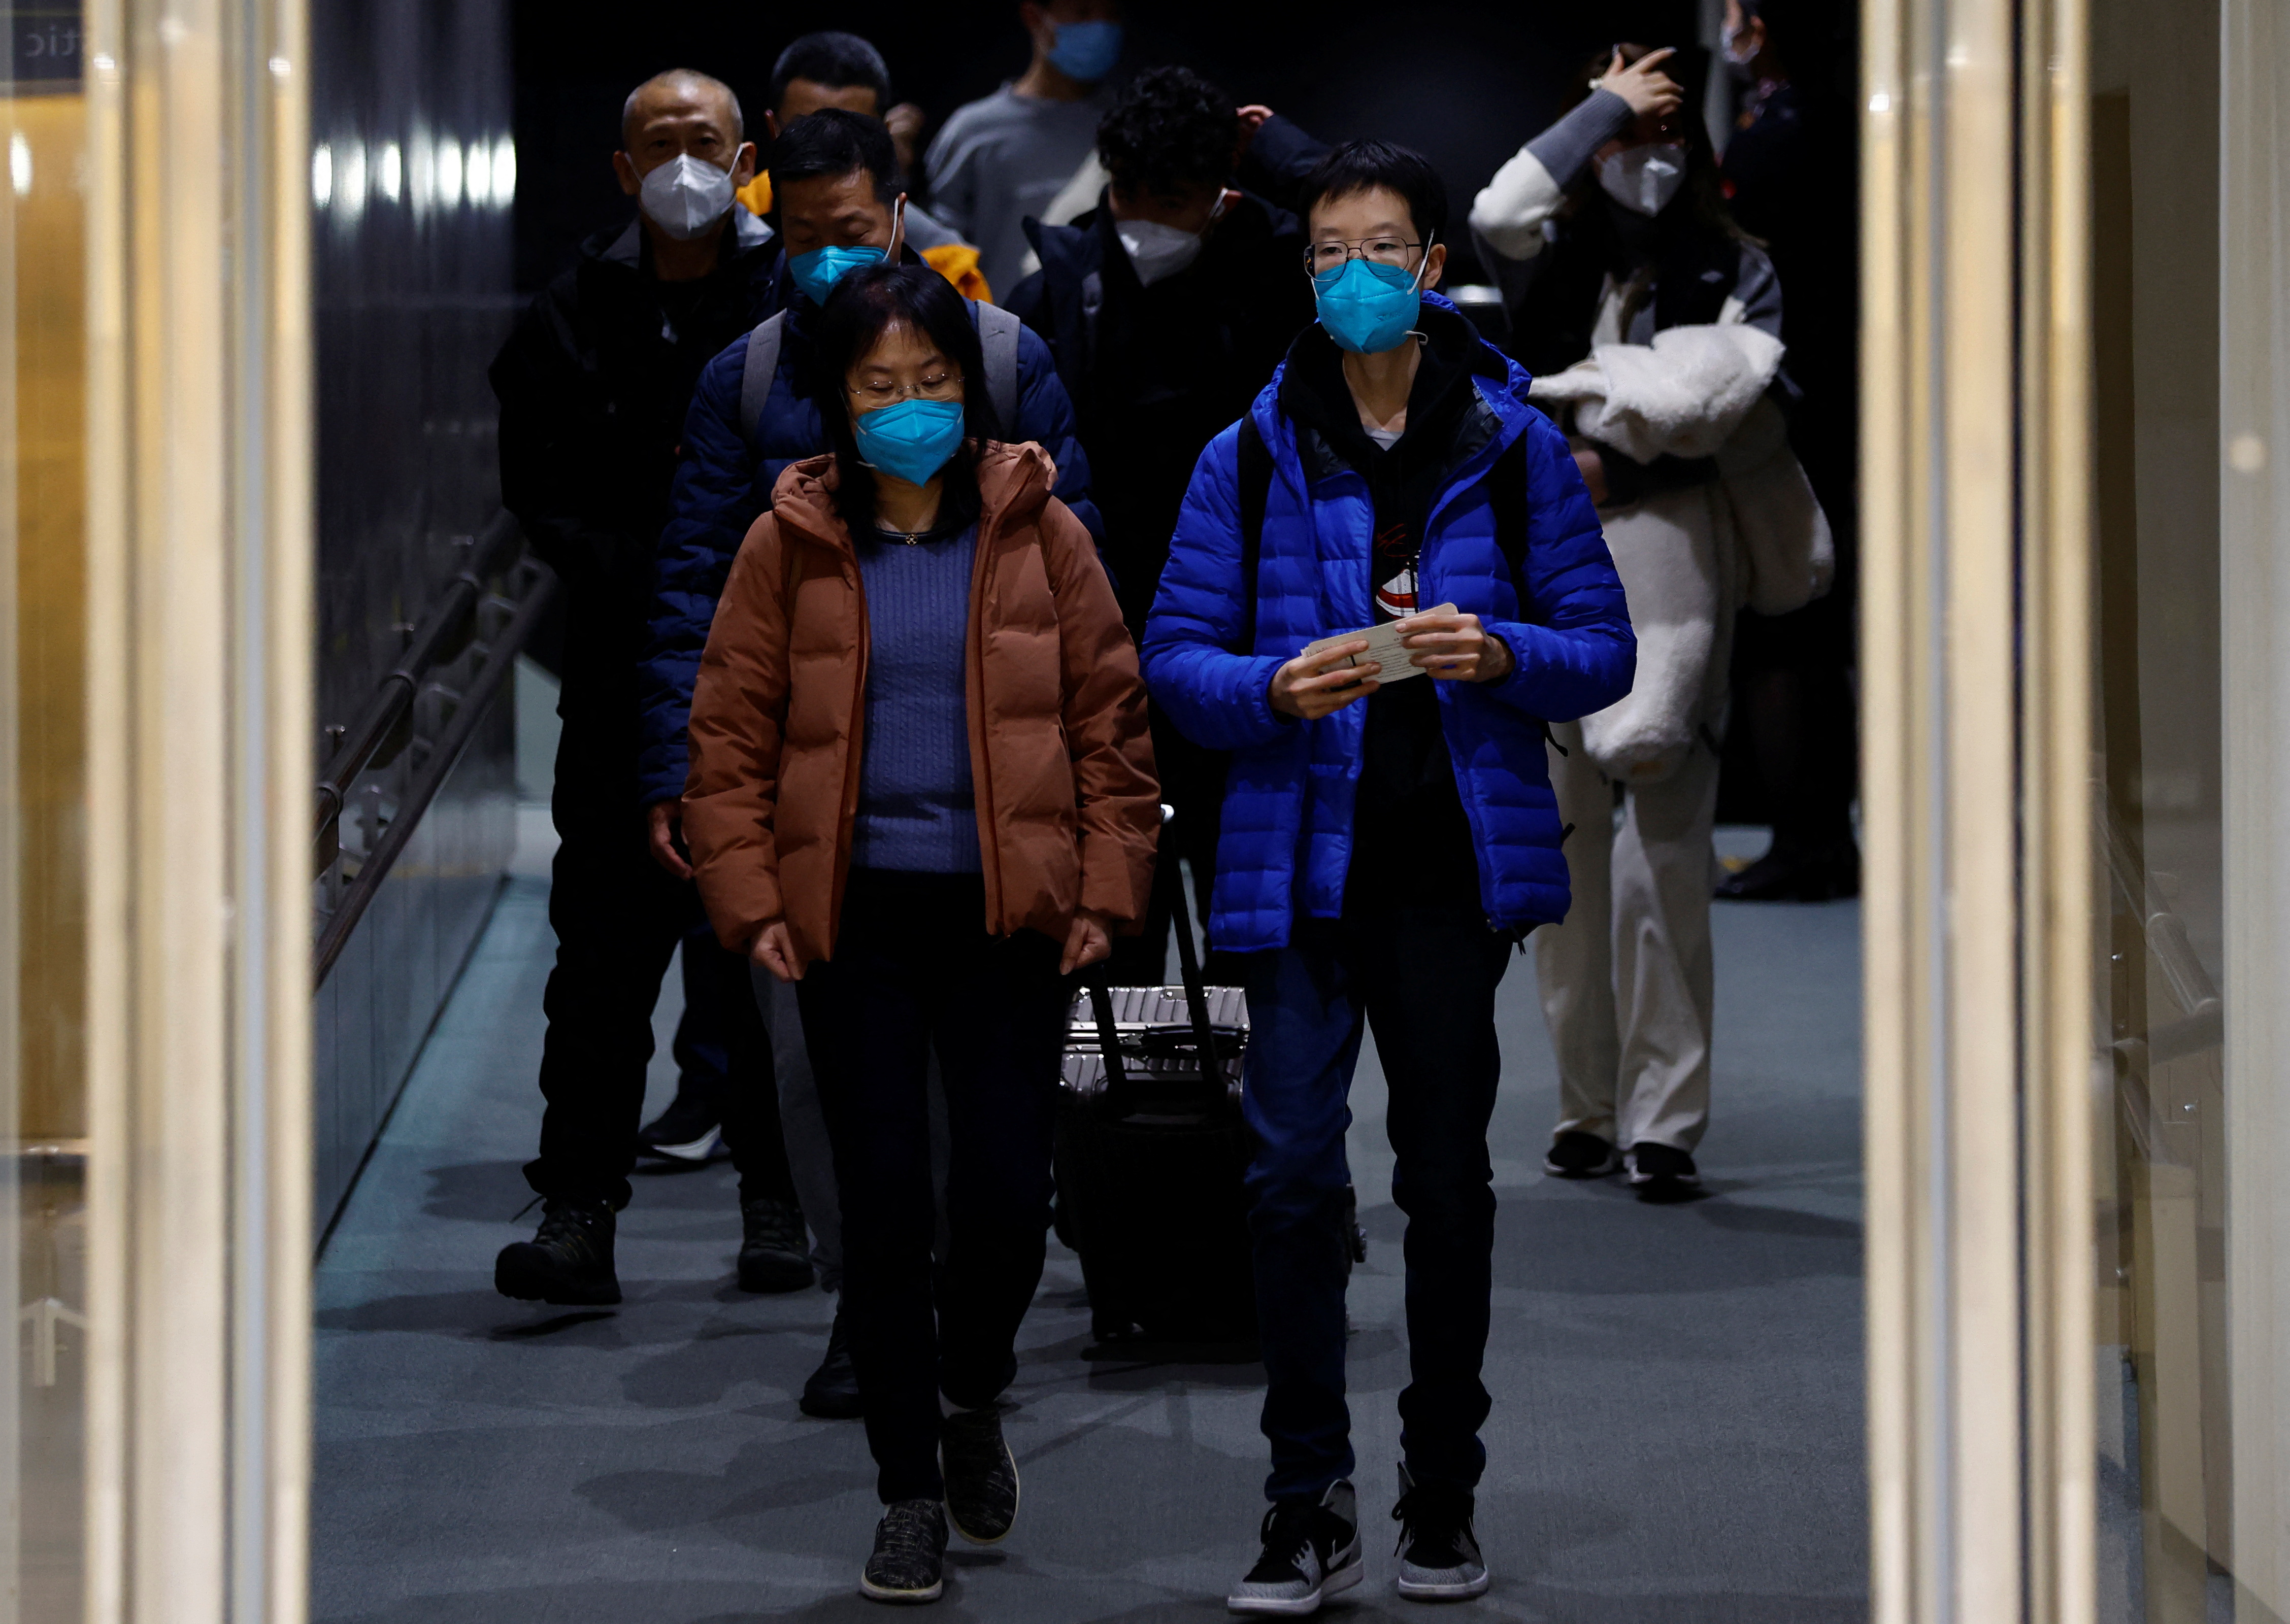 Passengers on a plane from China’s capital Beijing arrive at Narita international airport in Narita, east of Tokyo, Japan on January 8, 2023. (Reuters)